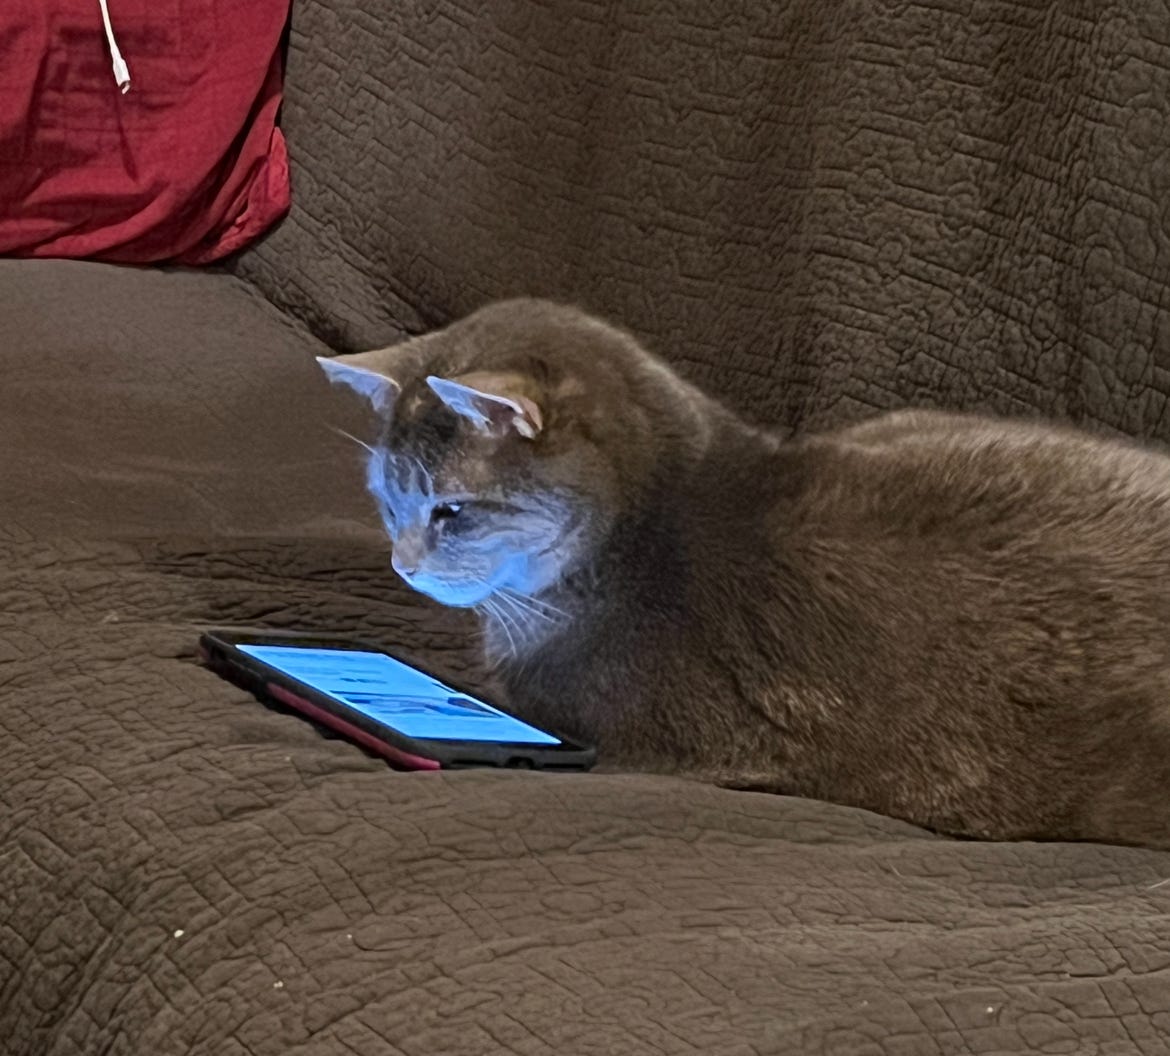 A grey cat seemingly staring at the illumated phone sitting on the couch in front of her